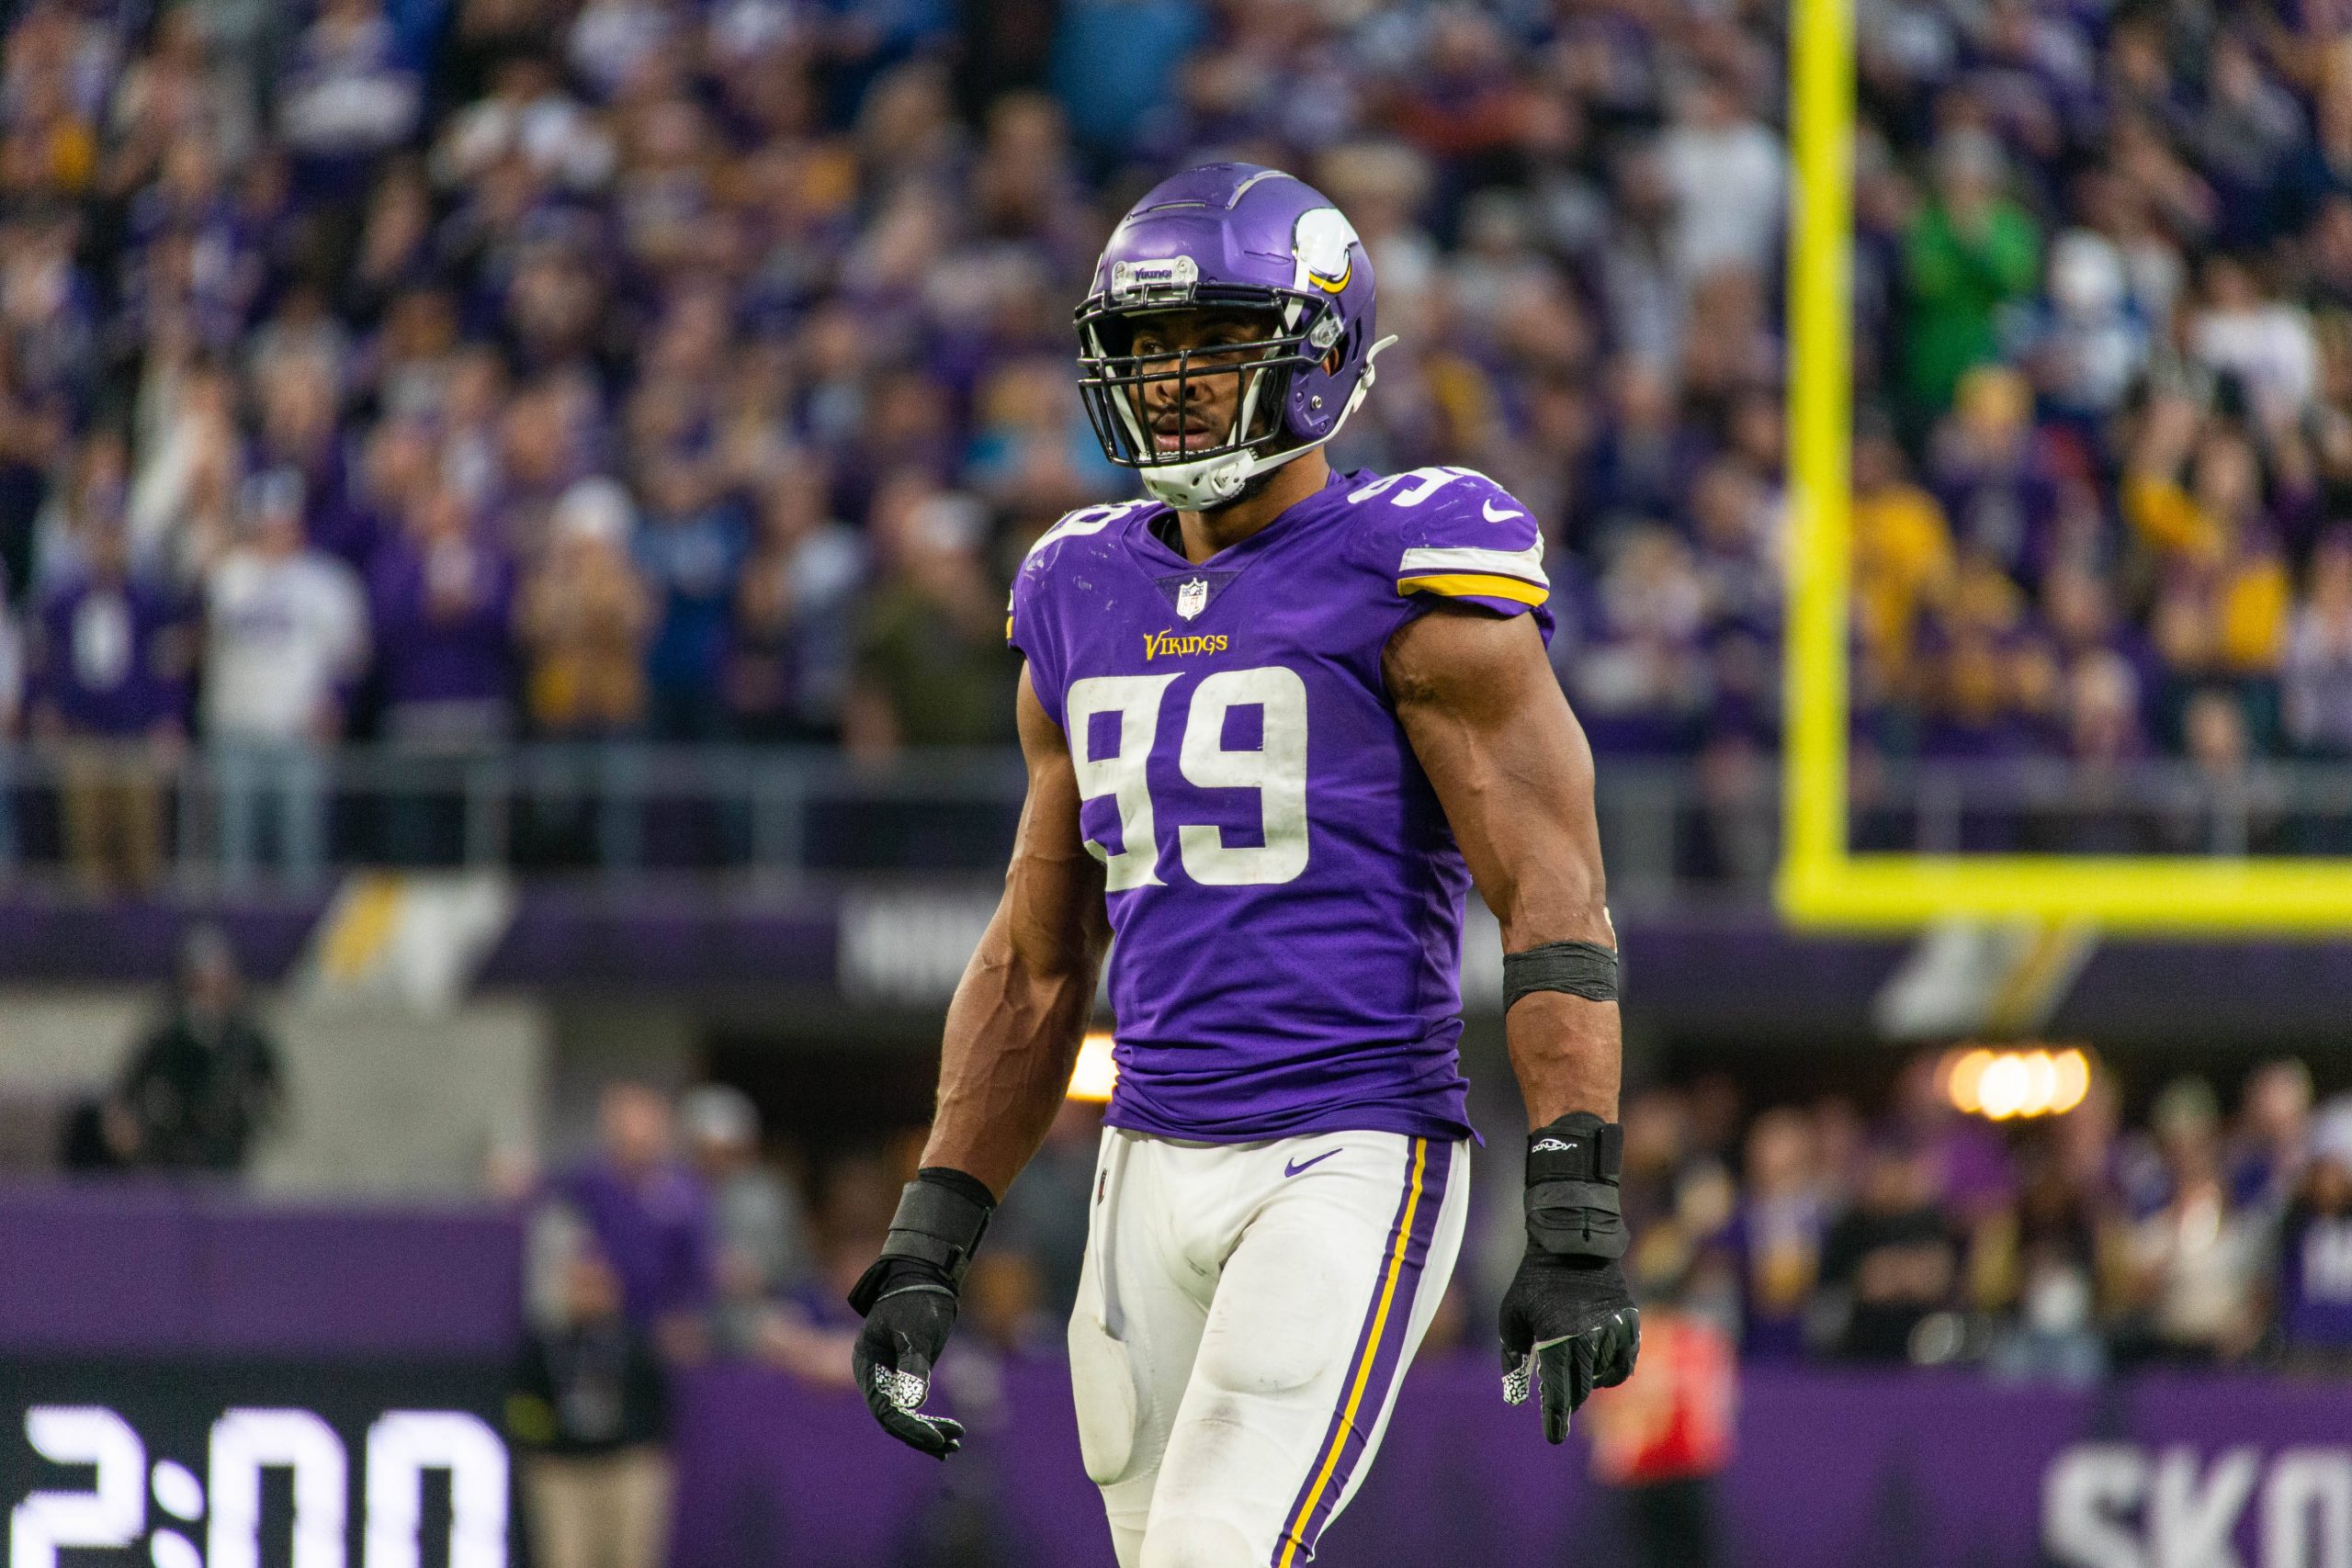 MINNEAPOLIS, MN - DECEMBER 17: Minnesota Vikings linebacker Danielle Hunter 99 look on during the NFL, American Football Herren, USA game between the Indianapolis Colts and Minnesota Vikings on December 17th, 2022, at U.S. Bank Stadium in Minneapolis, MN. Photo by Bailey Hillesheim/Icon Sportswire NFL: DEC 17 Colts at Vikings Icon221217153